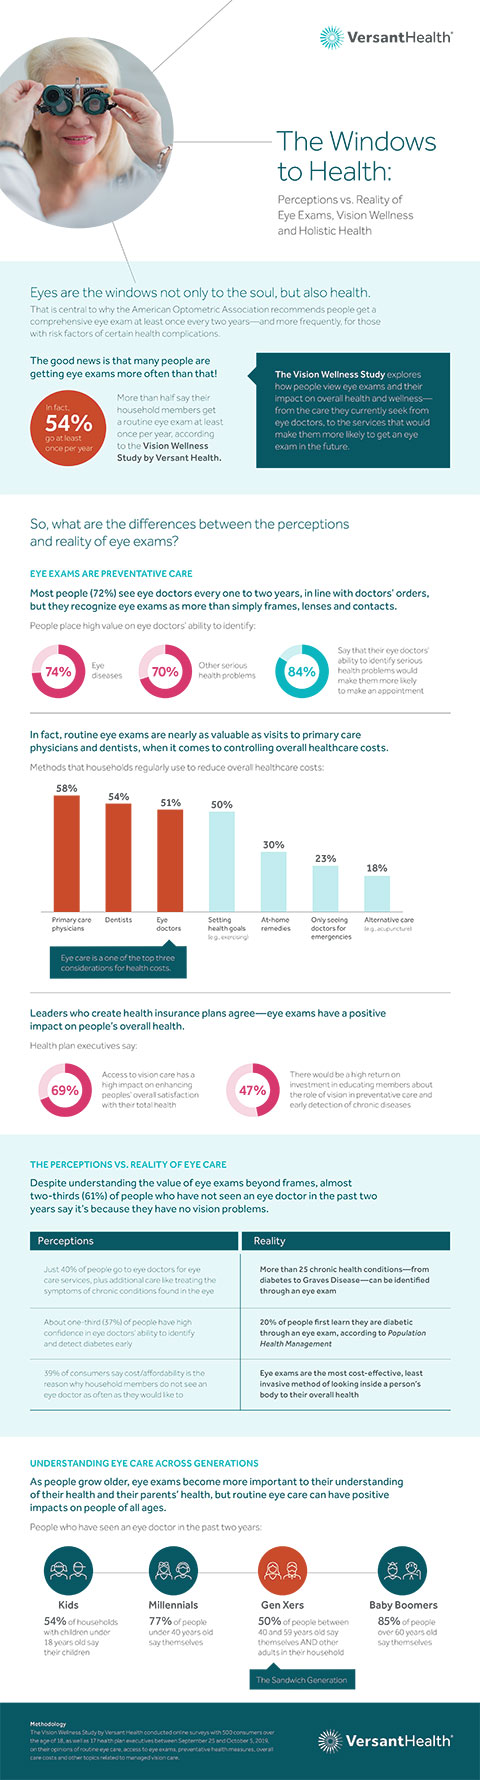 What are the perceptions vs. reality of eye exams, vision wellness and holistic health? View the infographic on Versant Health's Vision Wellness Study to find out. (Graphic: Business Wire)